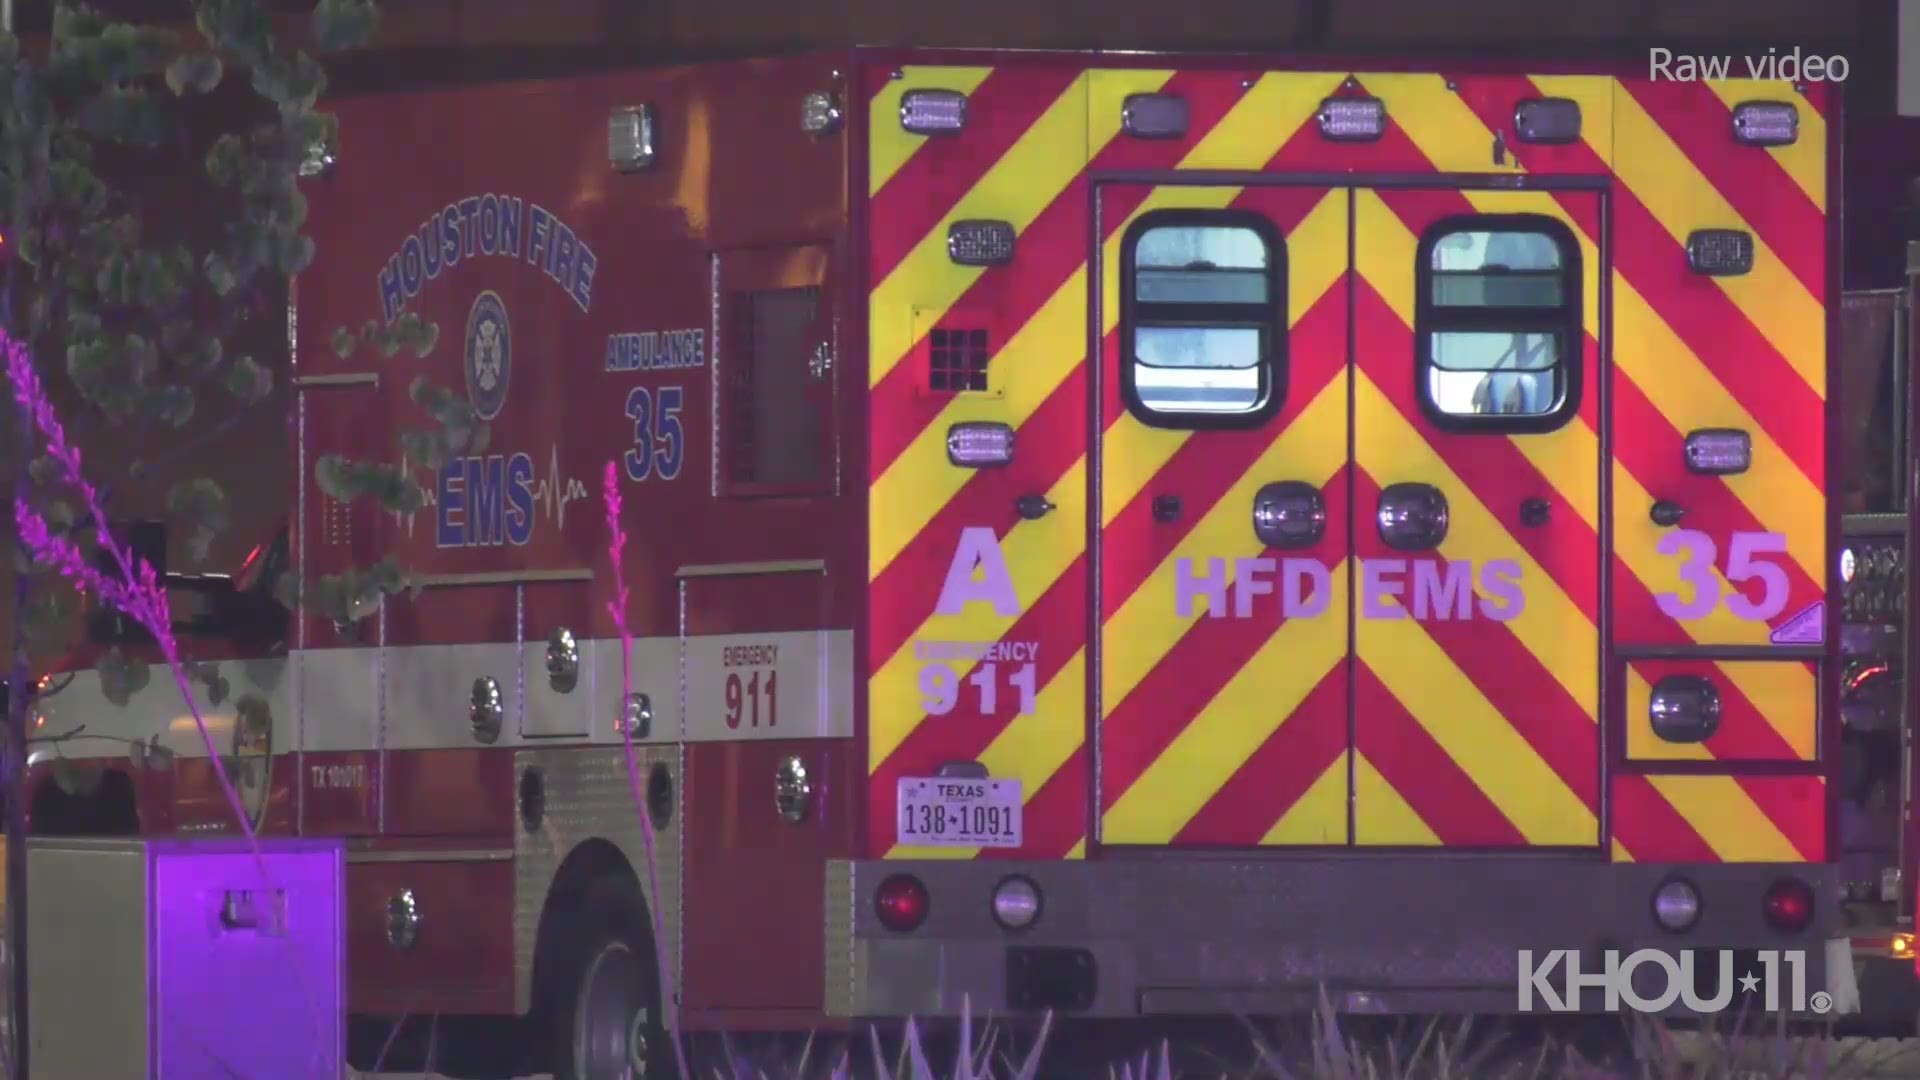 Houston police said a driver was taken into custody late Saturday night after crashing into the side of an ambulance.